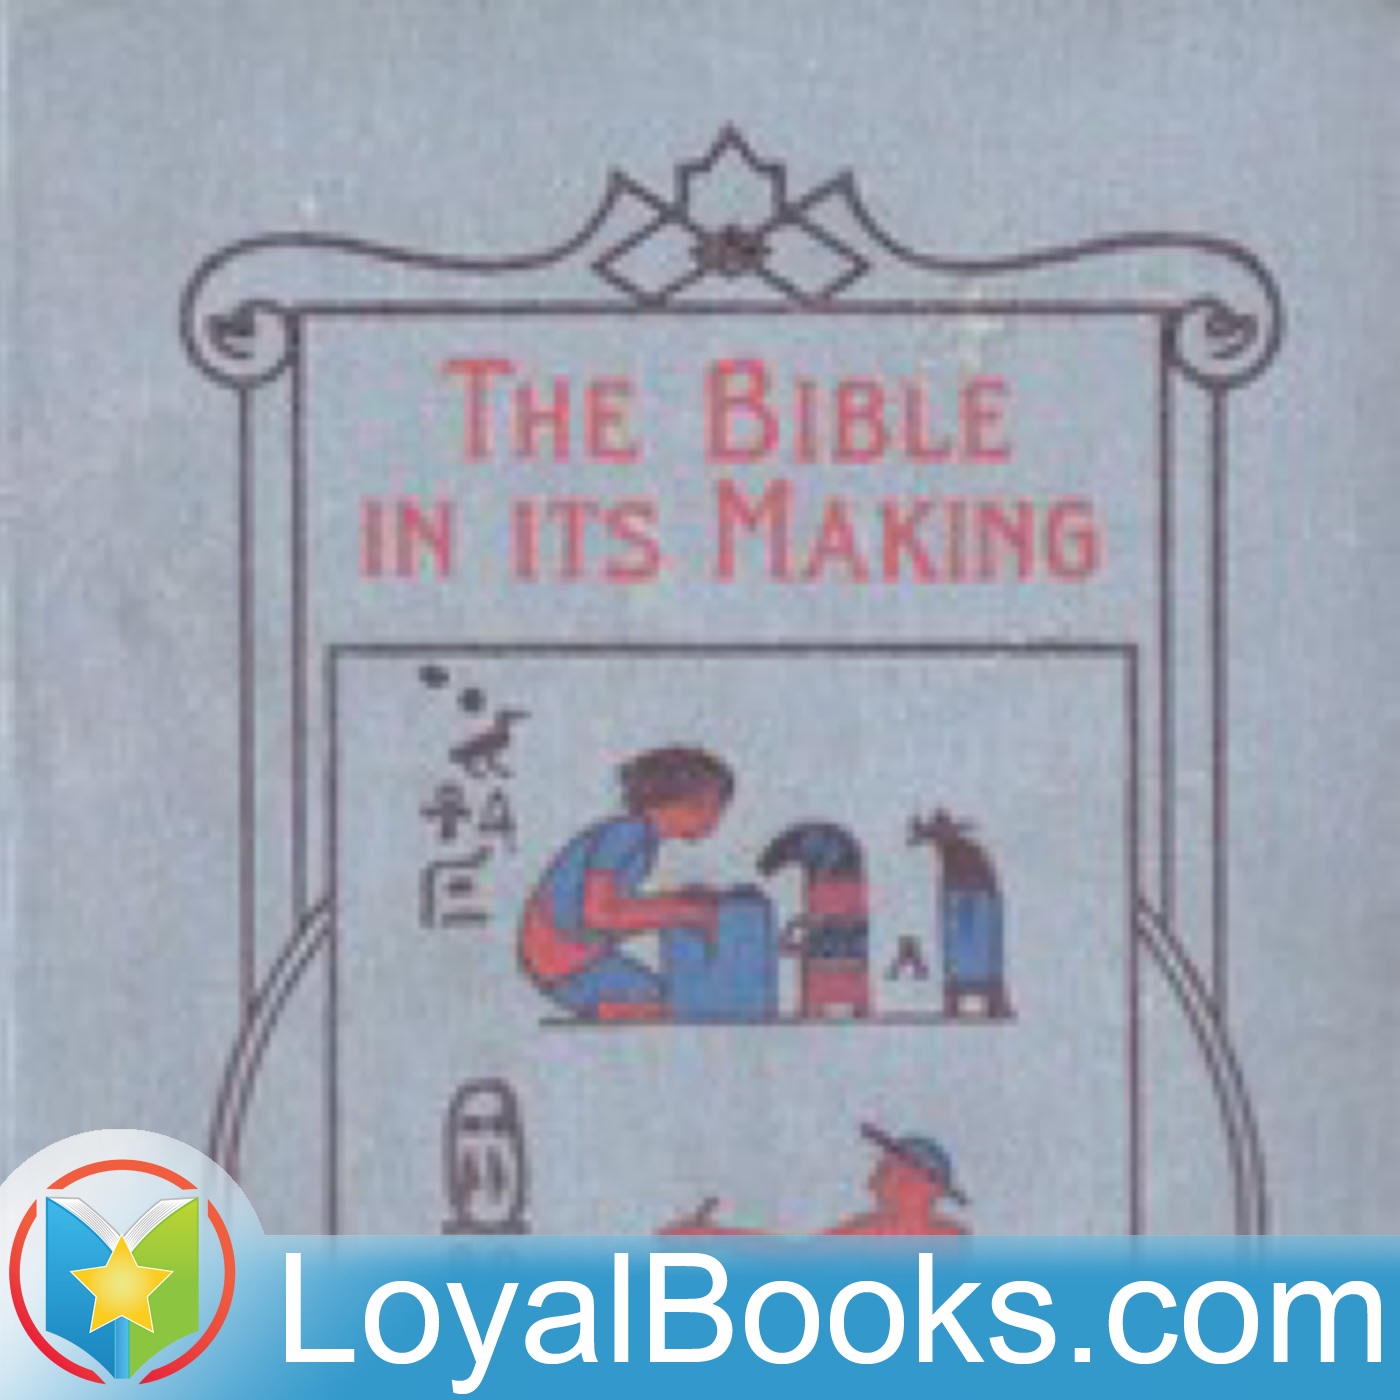 The Bible in Its Making - The Most Wonderful Book in the World by Mildred Duff